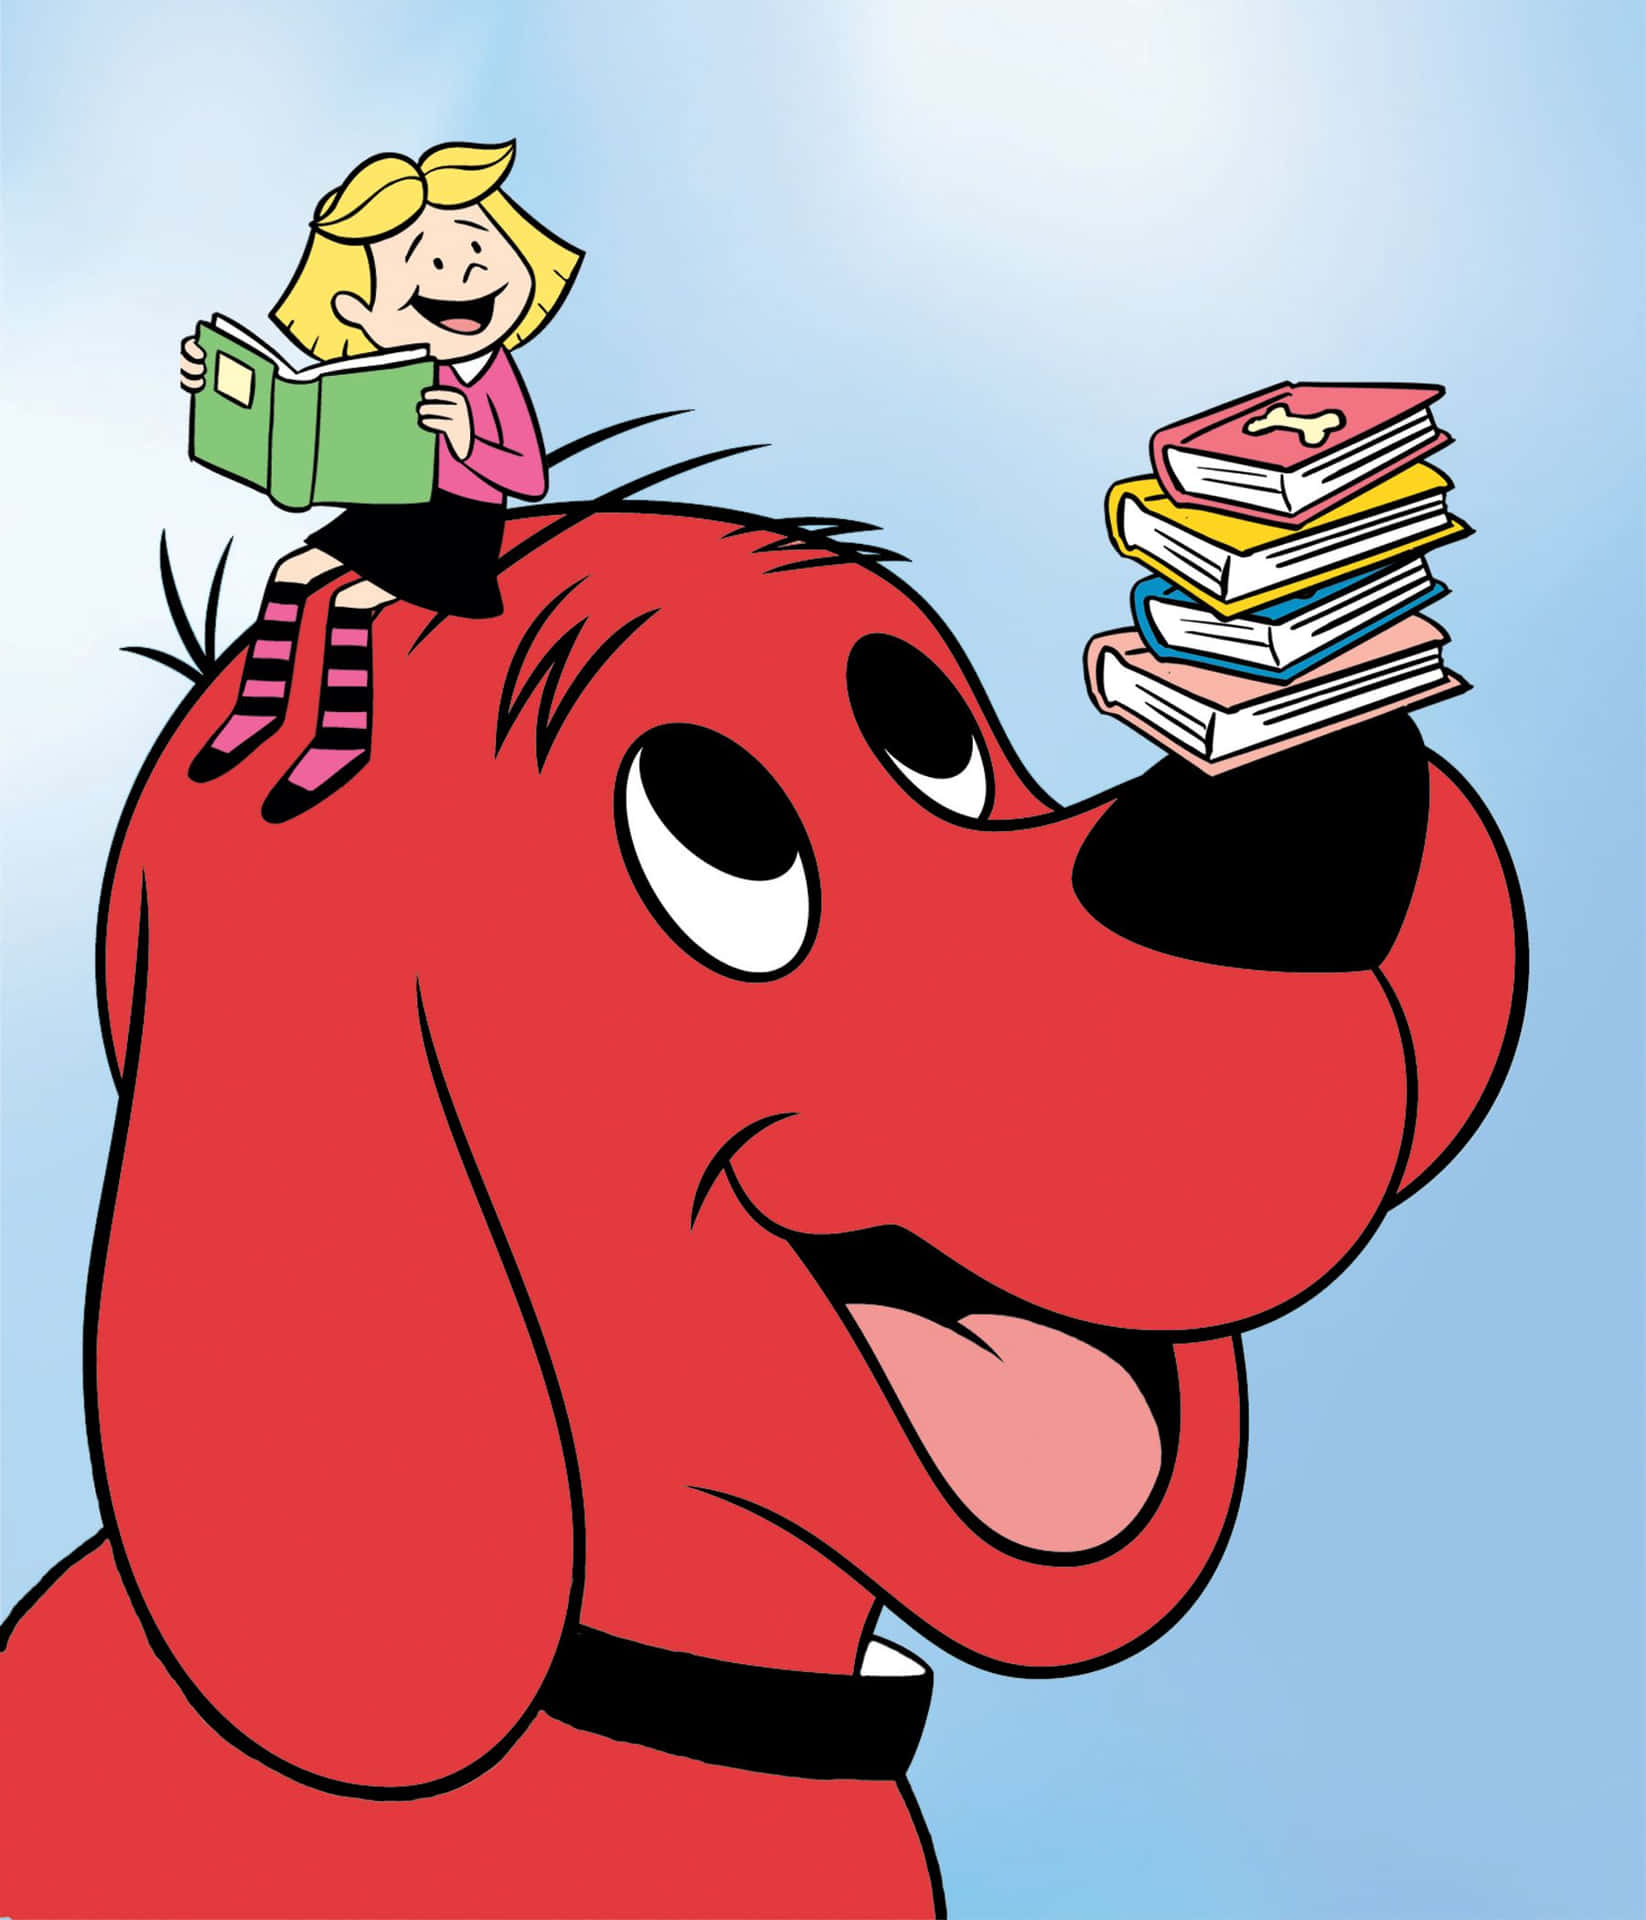 Clifford, The World's Biggest, happiest and most loveable Dog